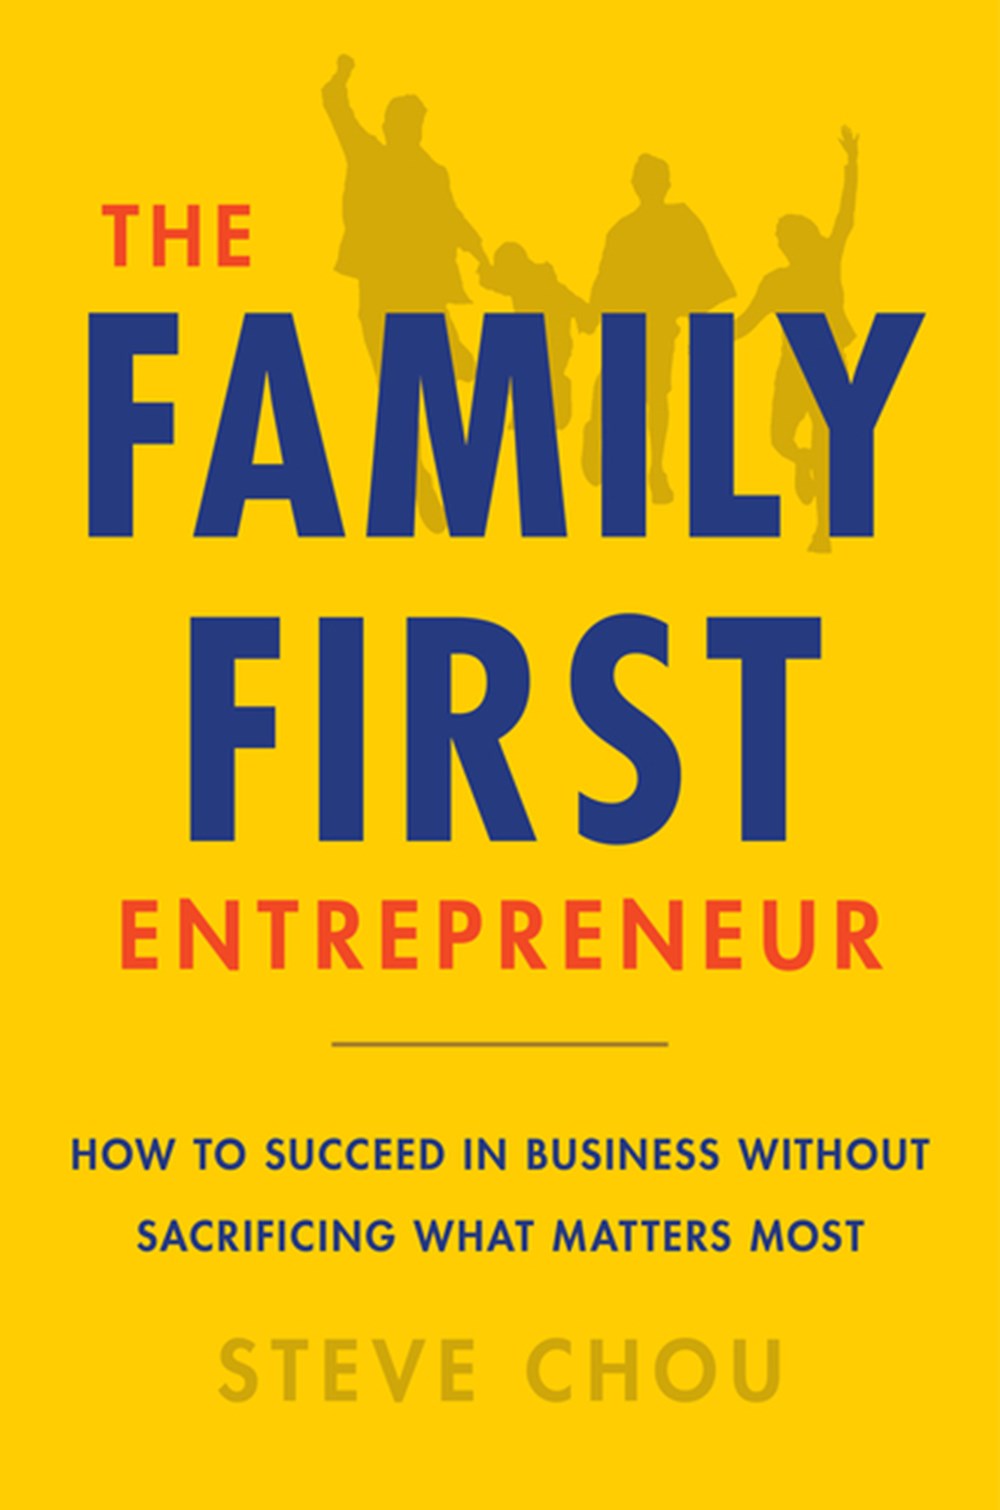 Family-First Entrepreneur: How to Achieve Financial Freedom Without Sacrificing What Matters Most